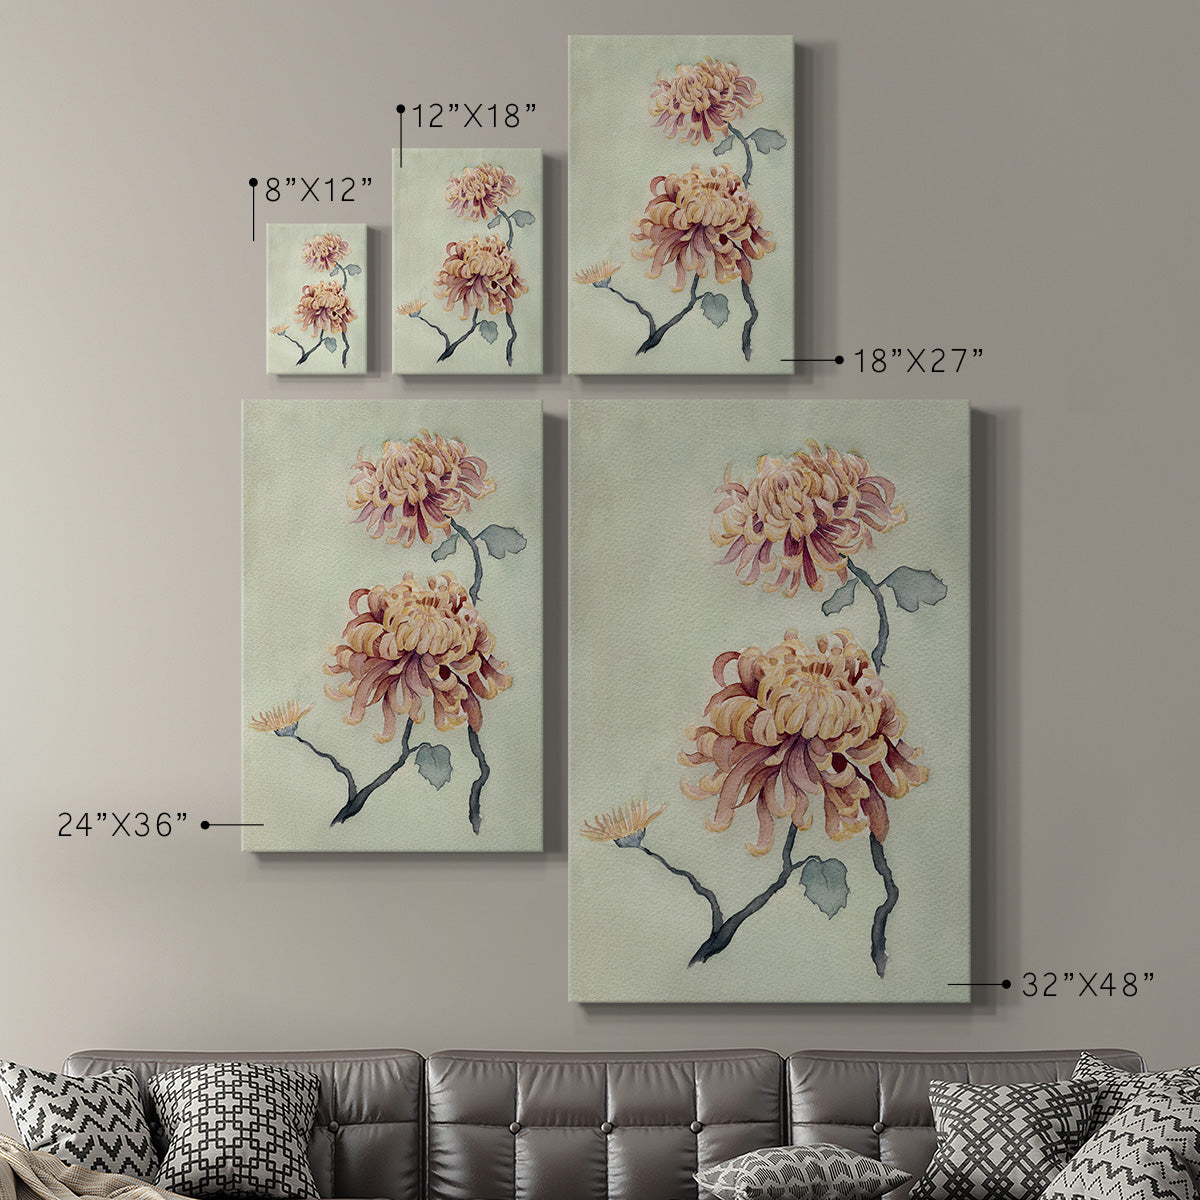 Chrysanthemum Beauty I Premium Gallery Wrapped Canvas - Ready to Hang